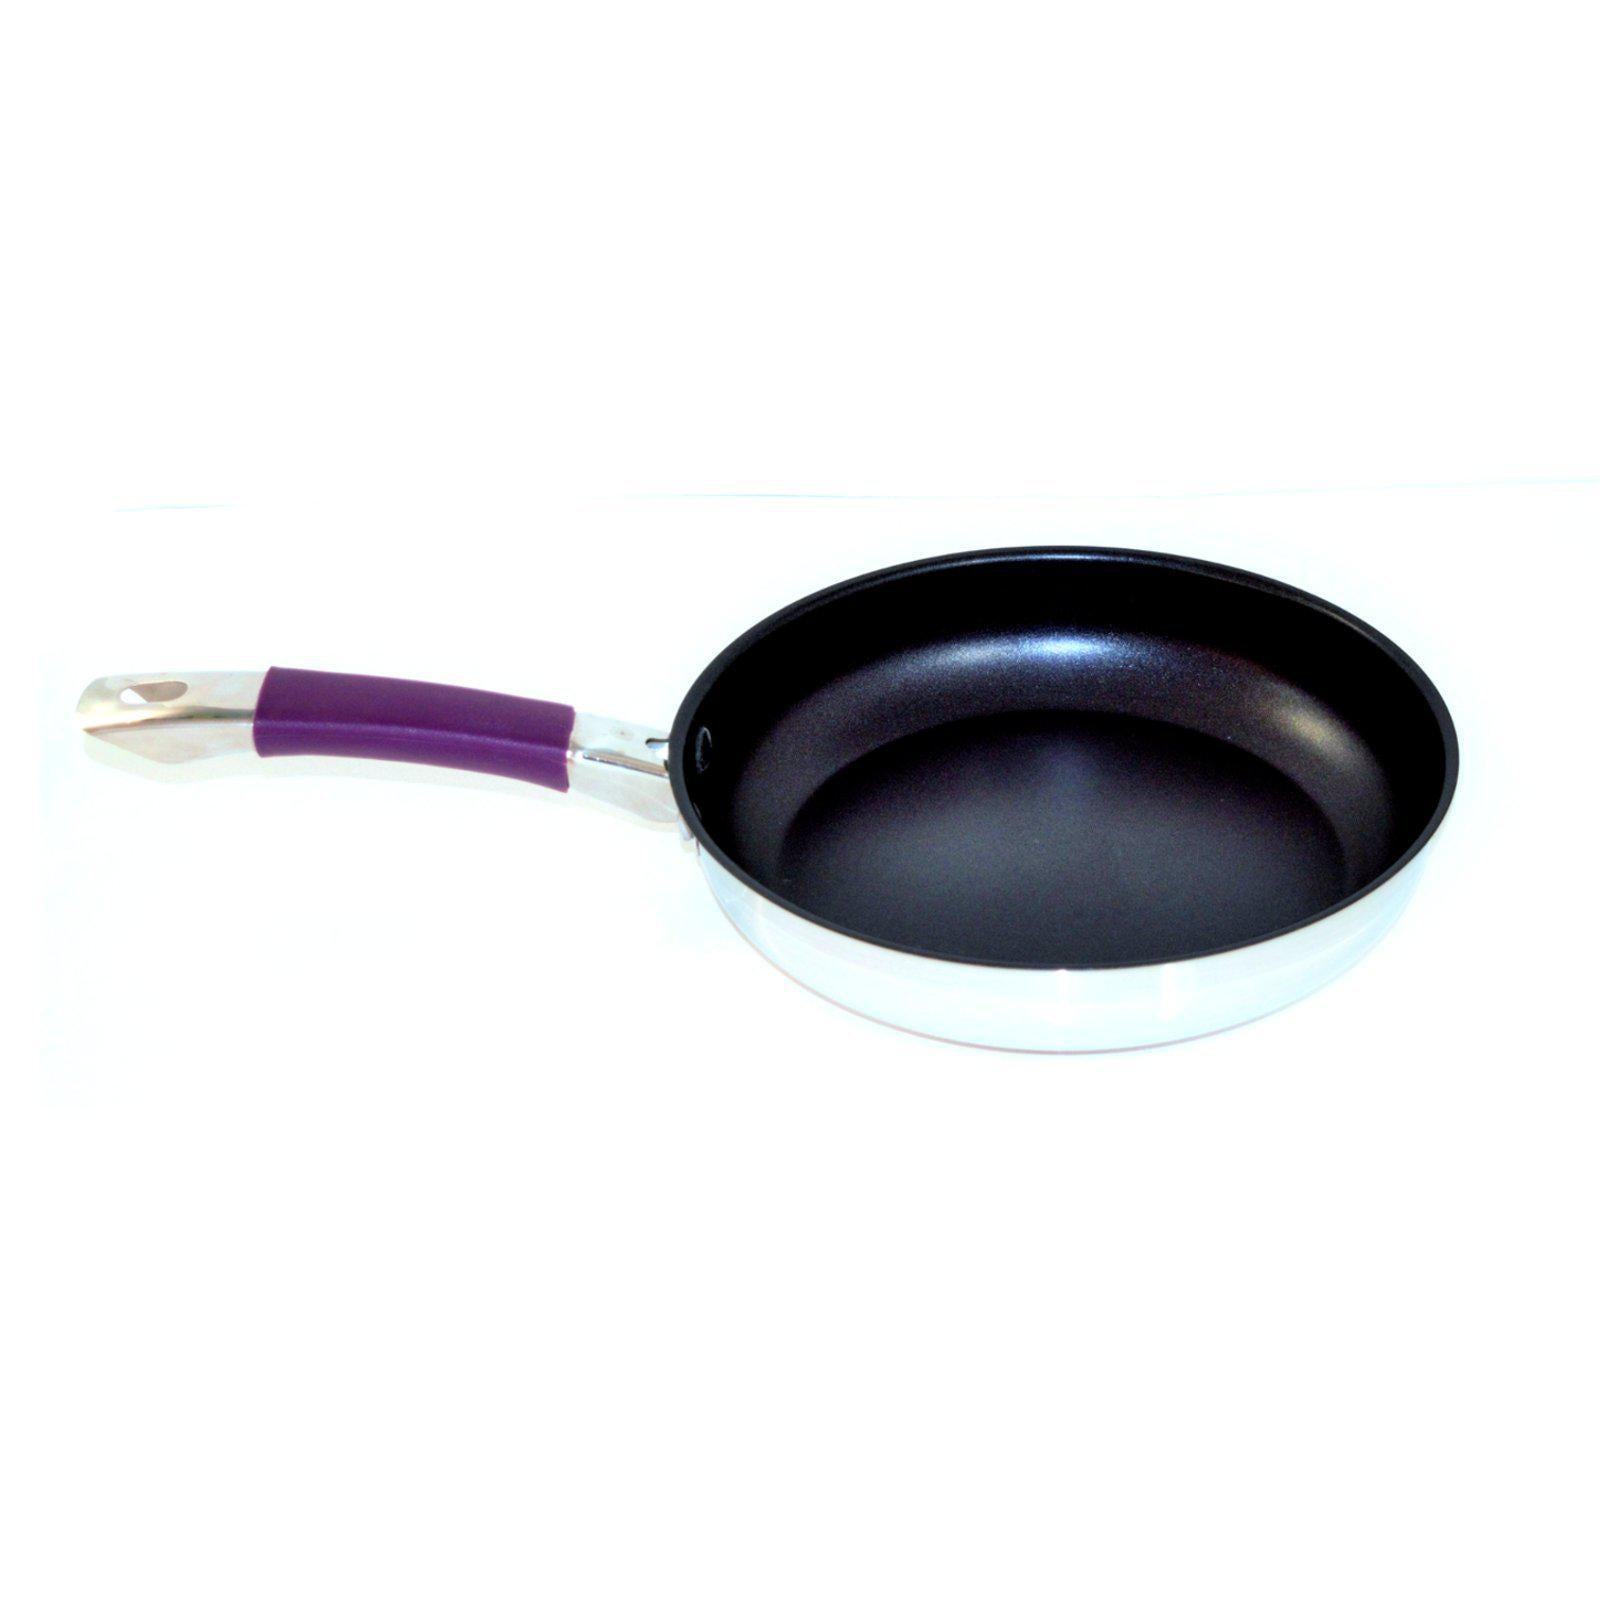 24 Cm Nonstick Frypan - Stainless Steel Design-Stainless Steel Cookware-Chef's Quality Cookware